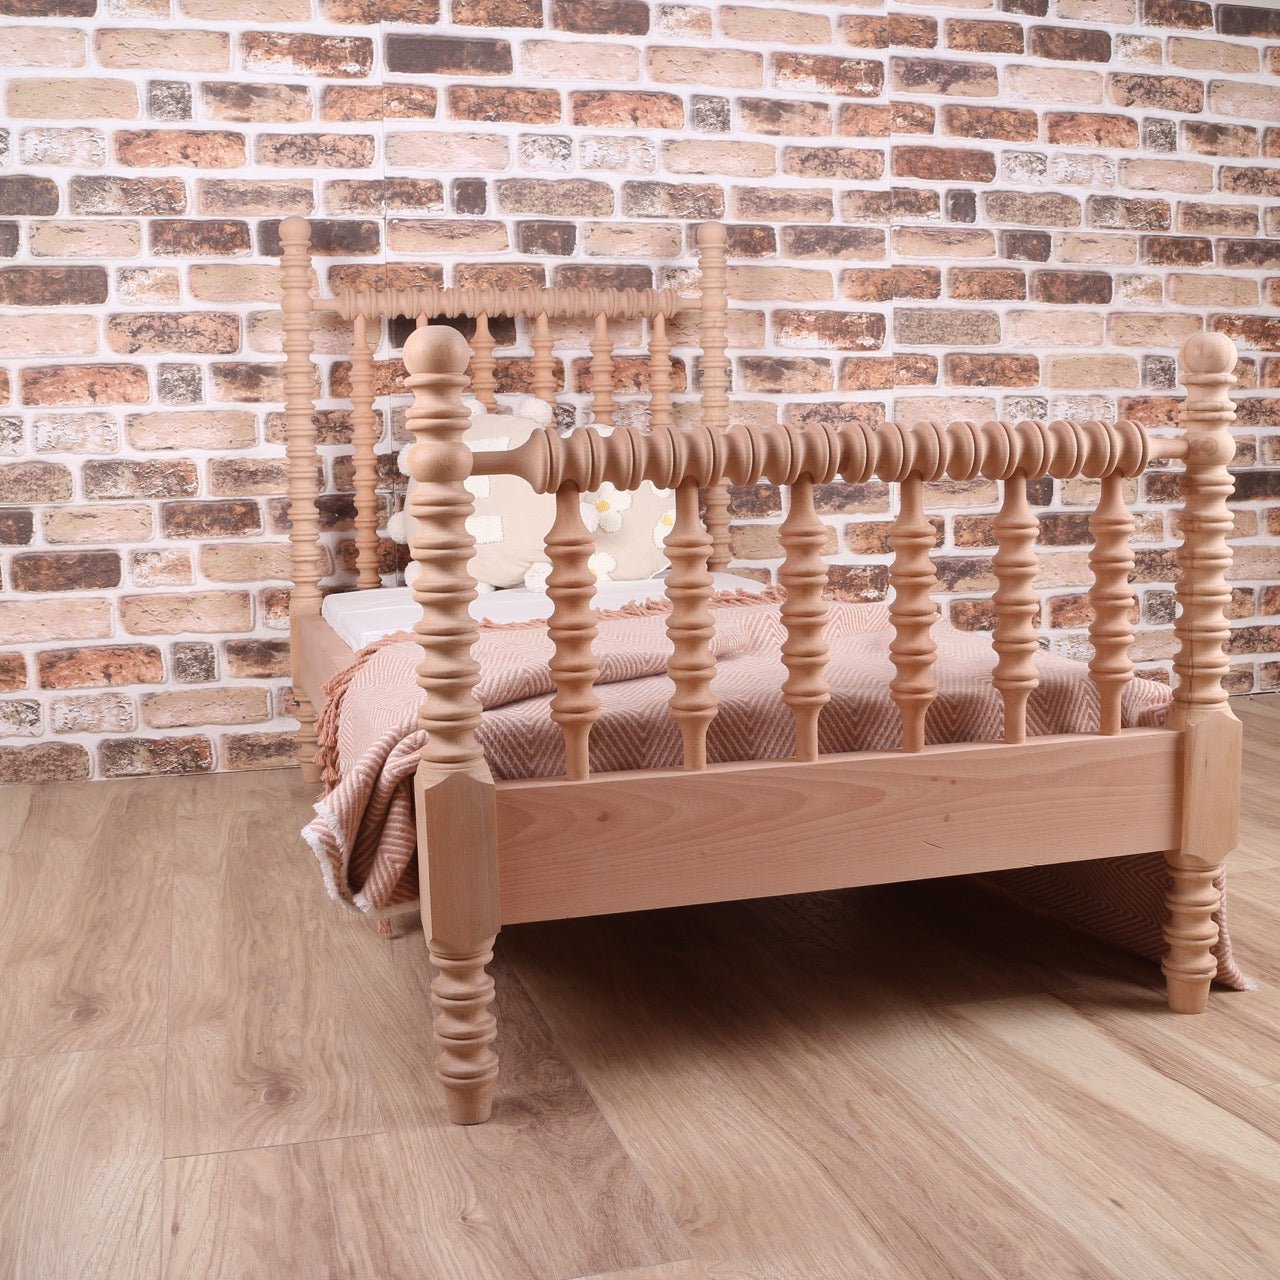 Customizable Jenny Lind Spindle Bed Custom Size and Color - Kids Wood Store